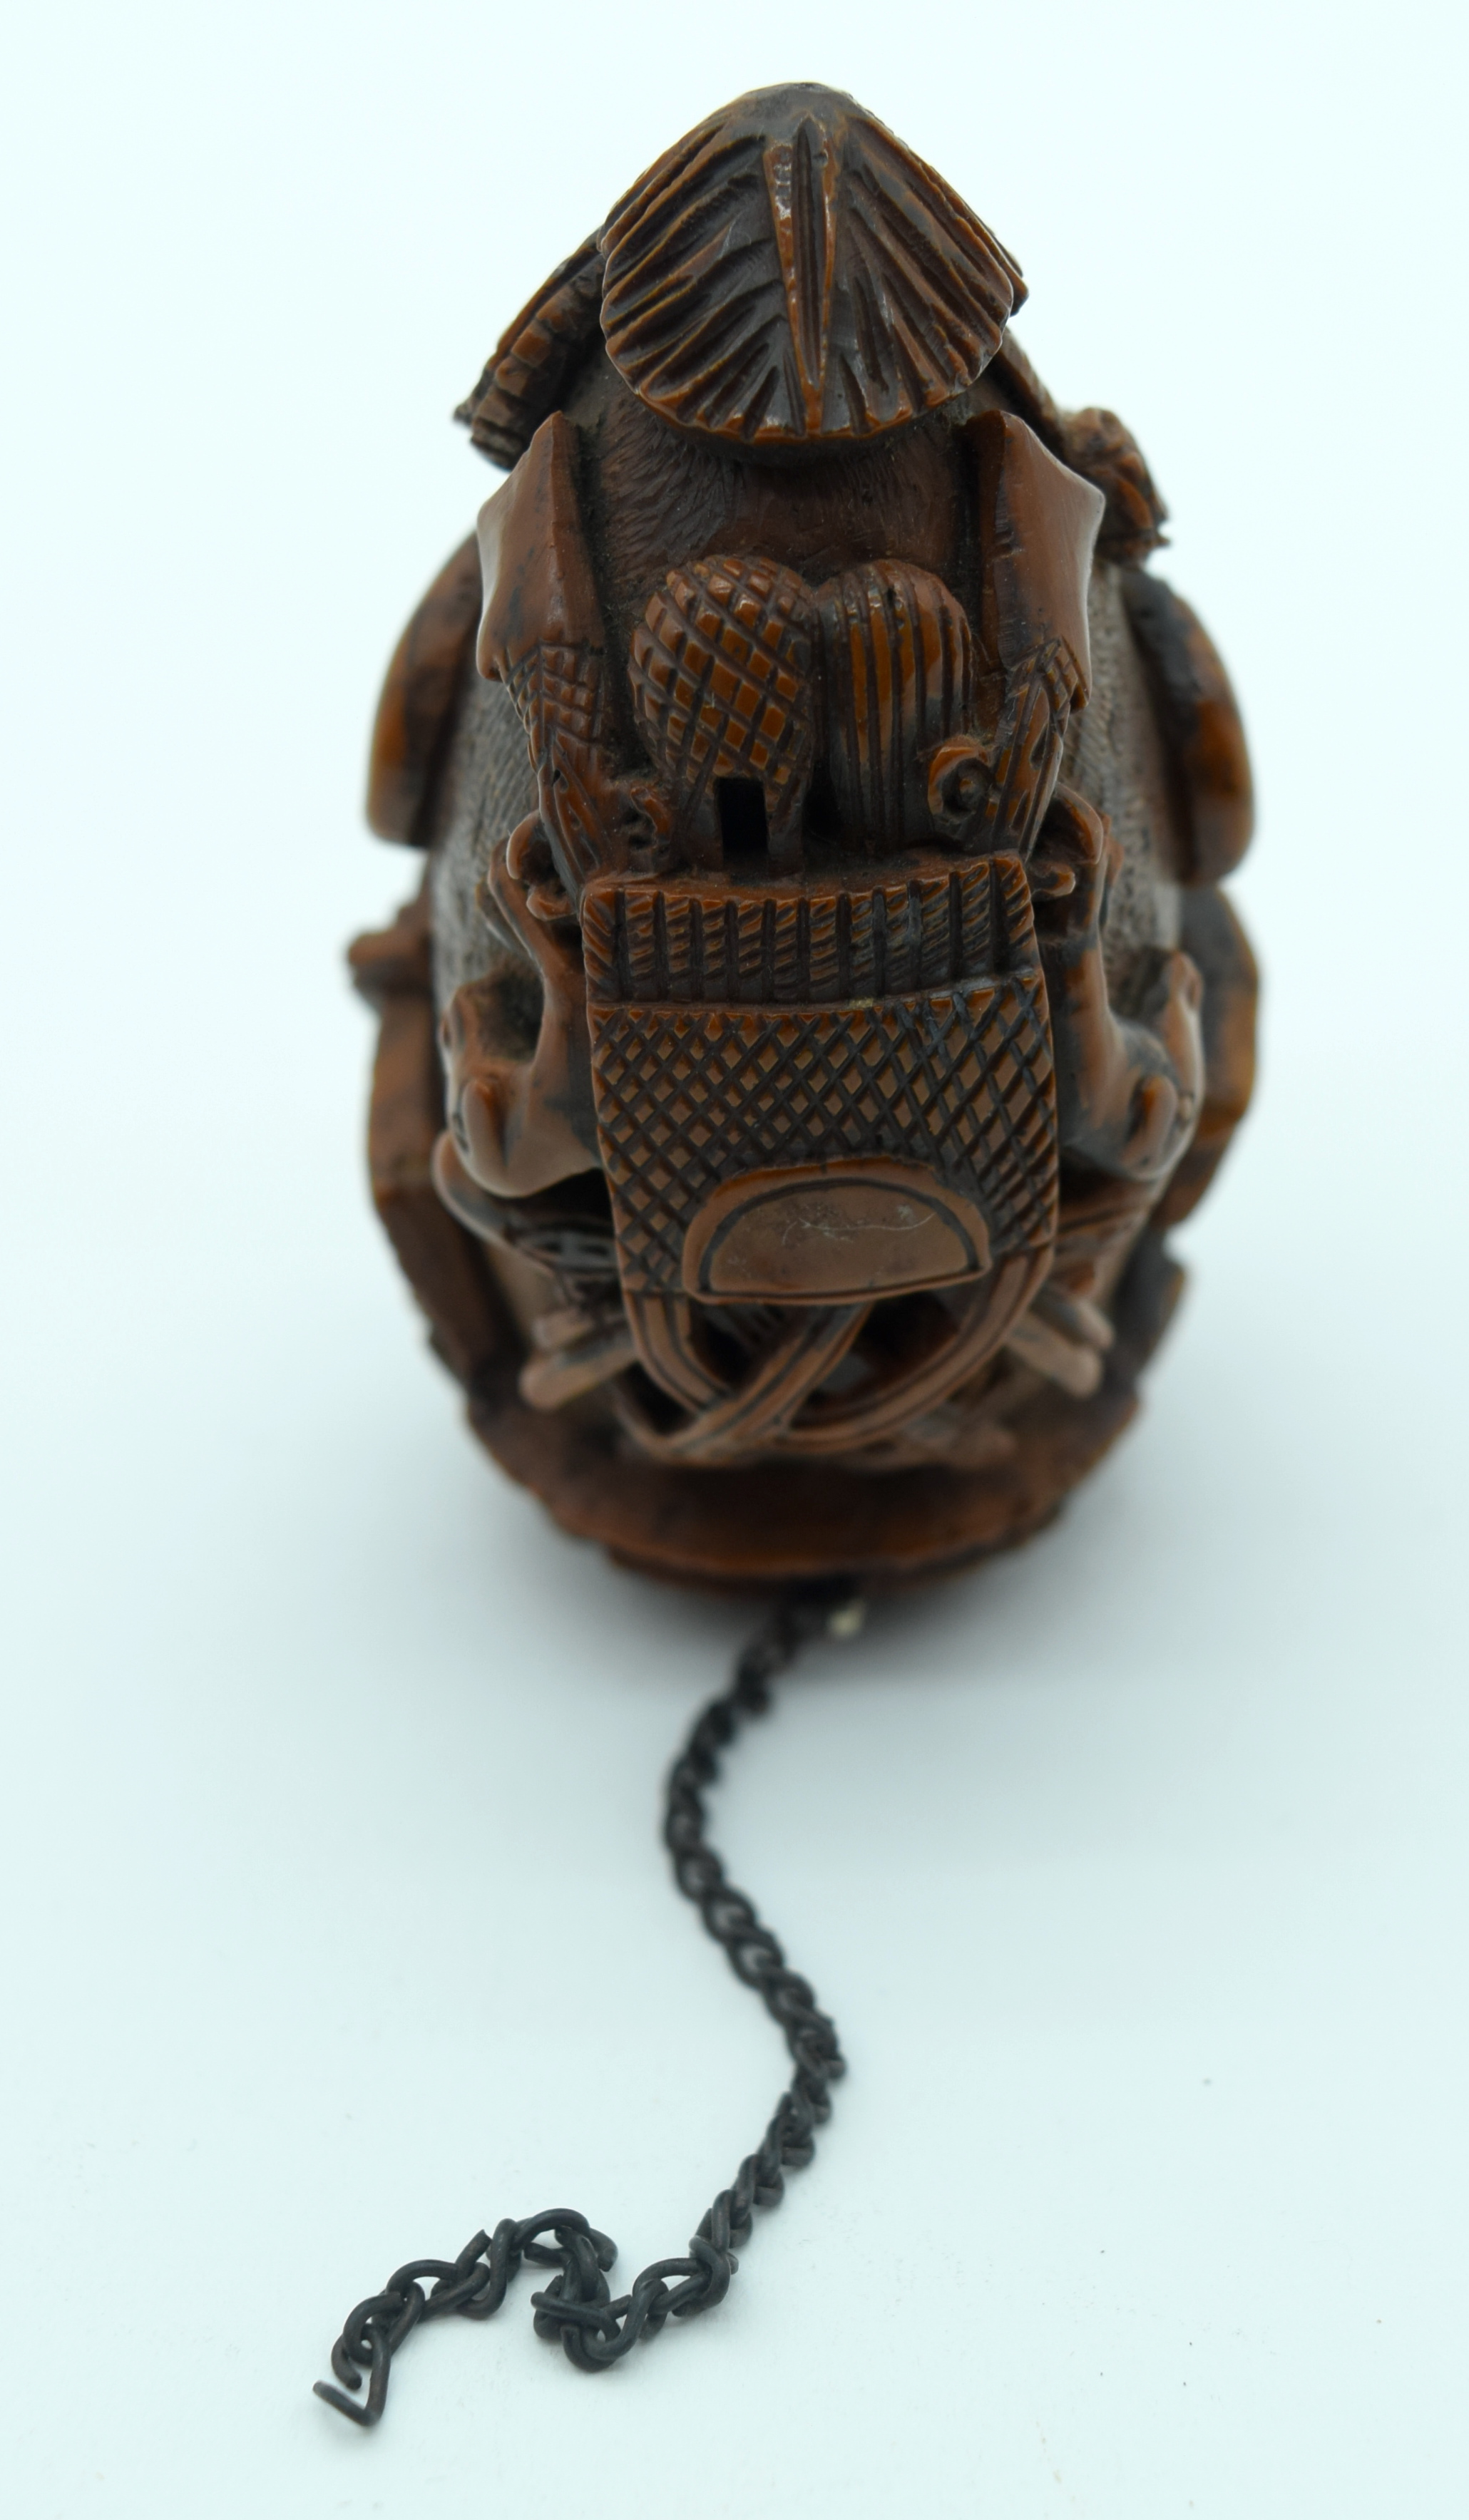 AN 18TH/19TH CENTURY FRENCH CARVED COQUILLA NUT SNUFF BOTTLE decorated with dogs, guns and swords. 6